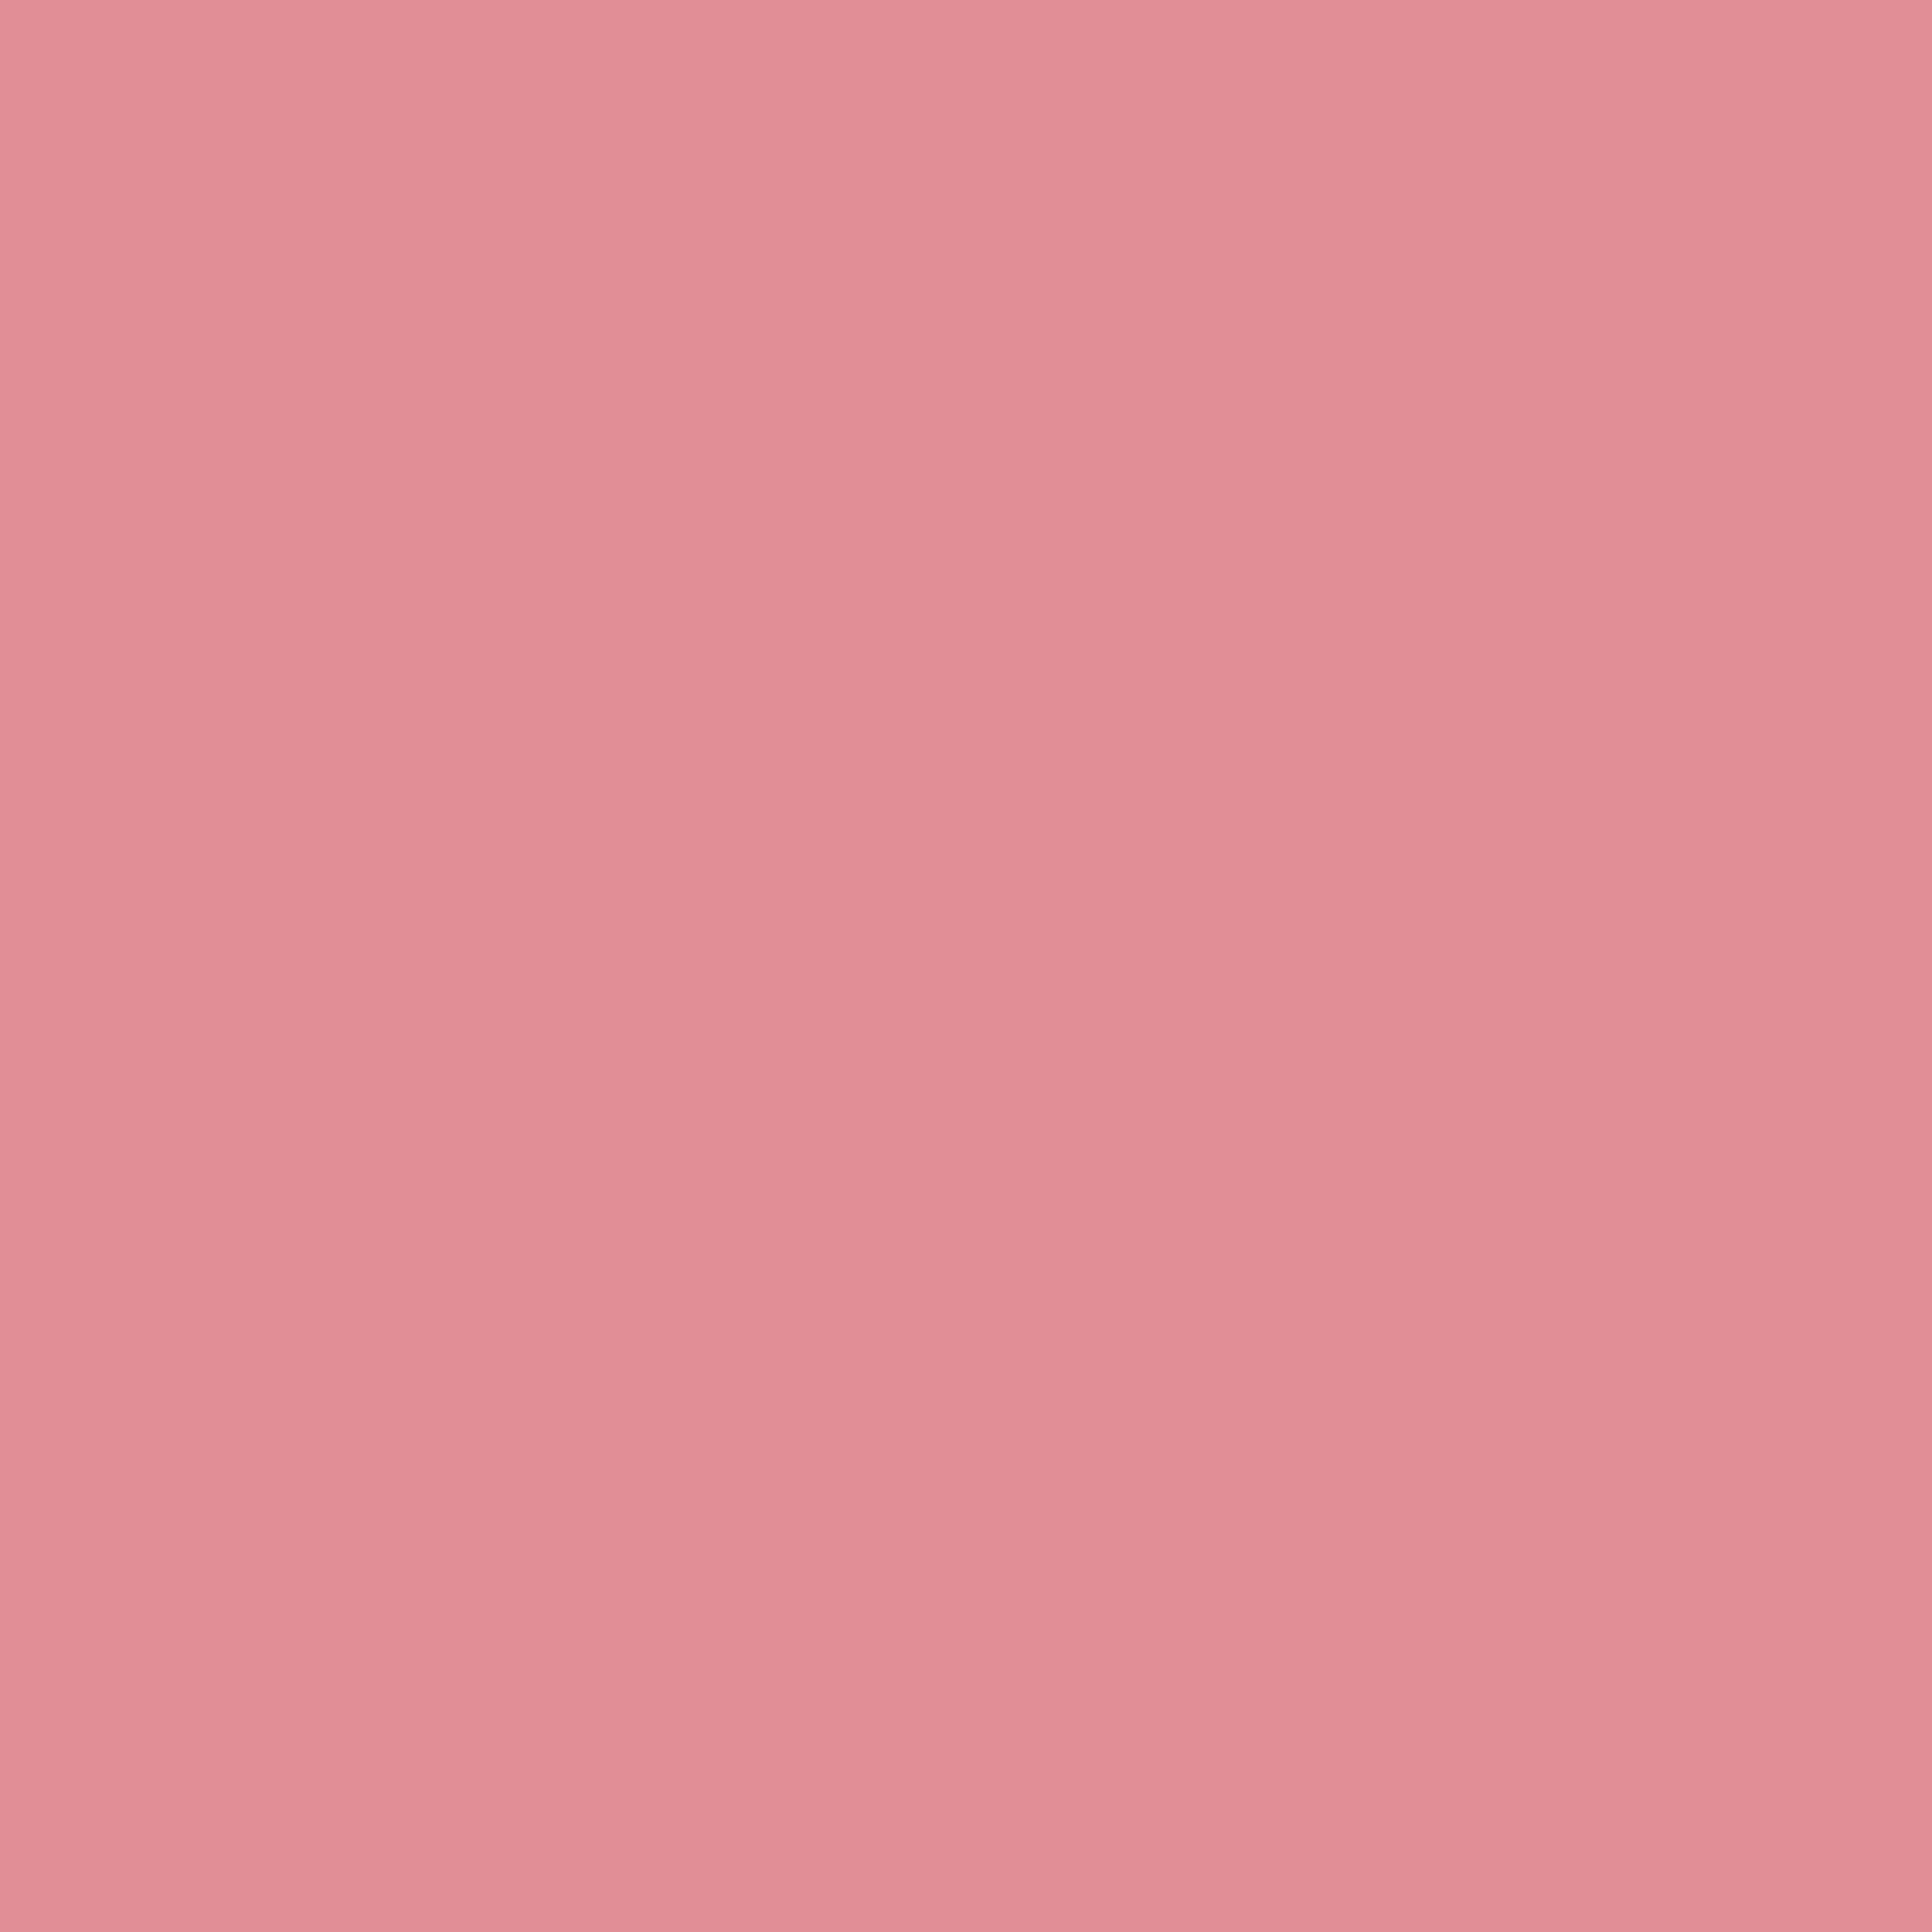 3600x3600 Ruddy Pink Solid Color Background